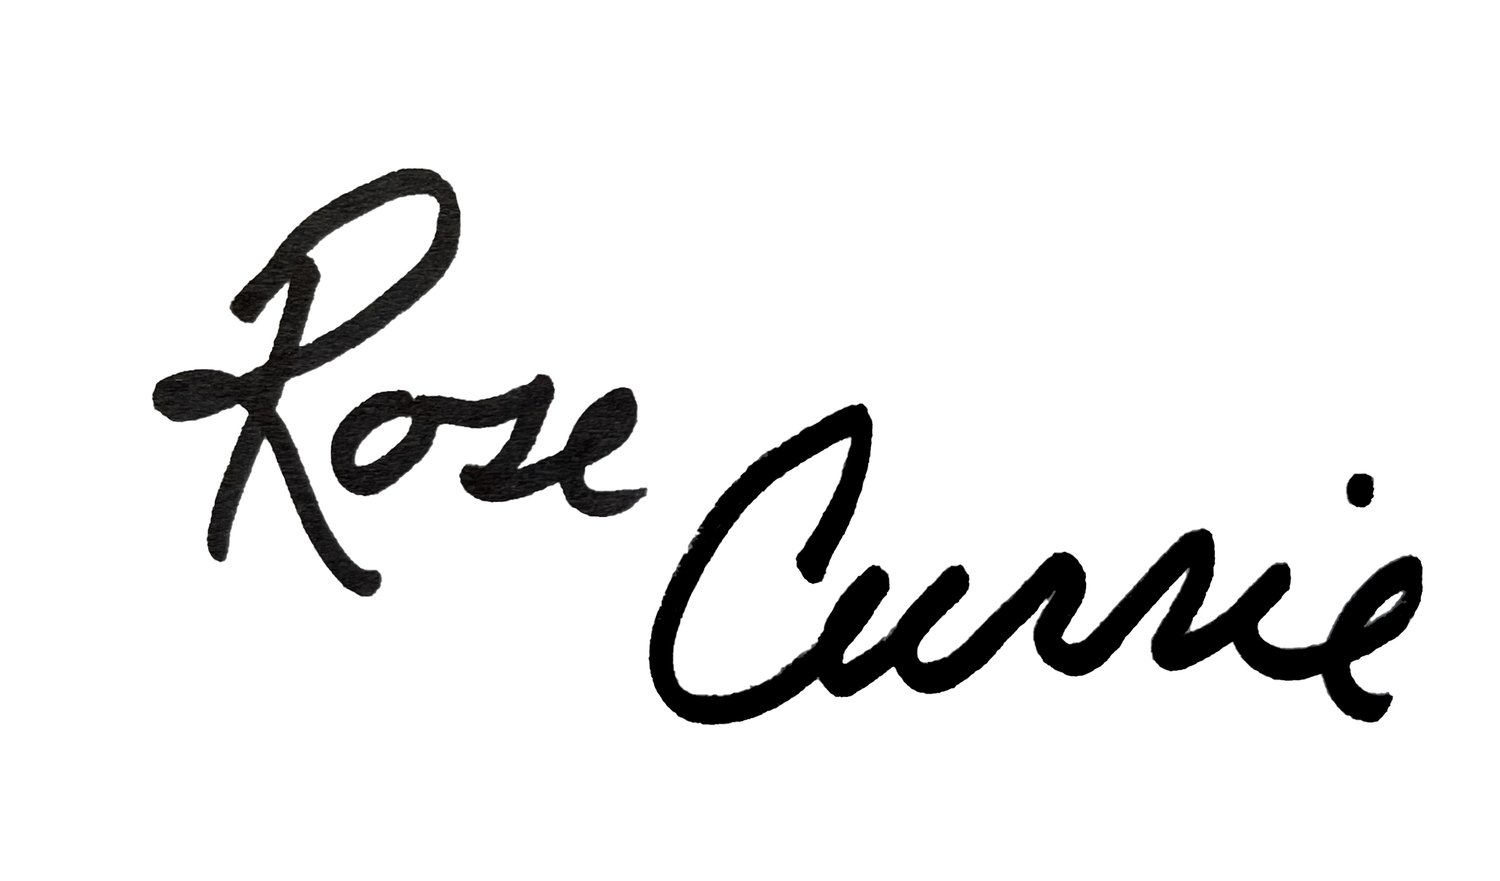 Rose Currie